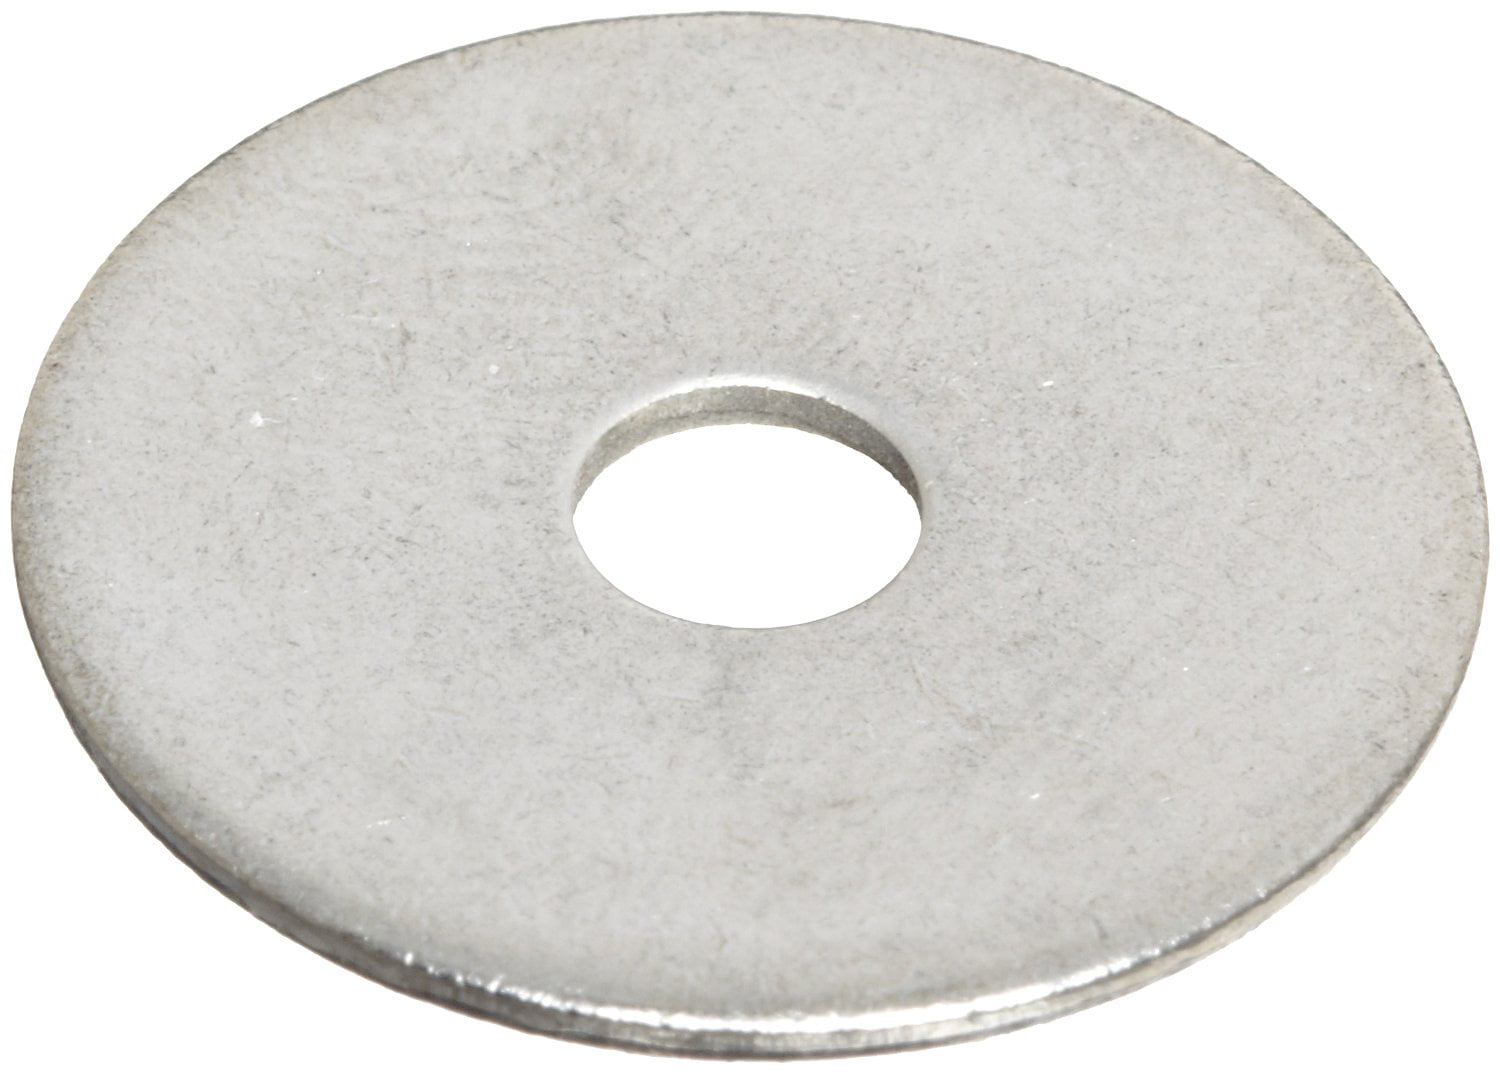 200 Flat Washers 9/64" x 3/8" x .031 #6 Hole Size Stainless Steel 2 Packs of 100 